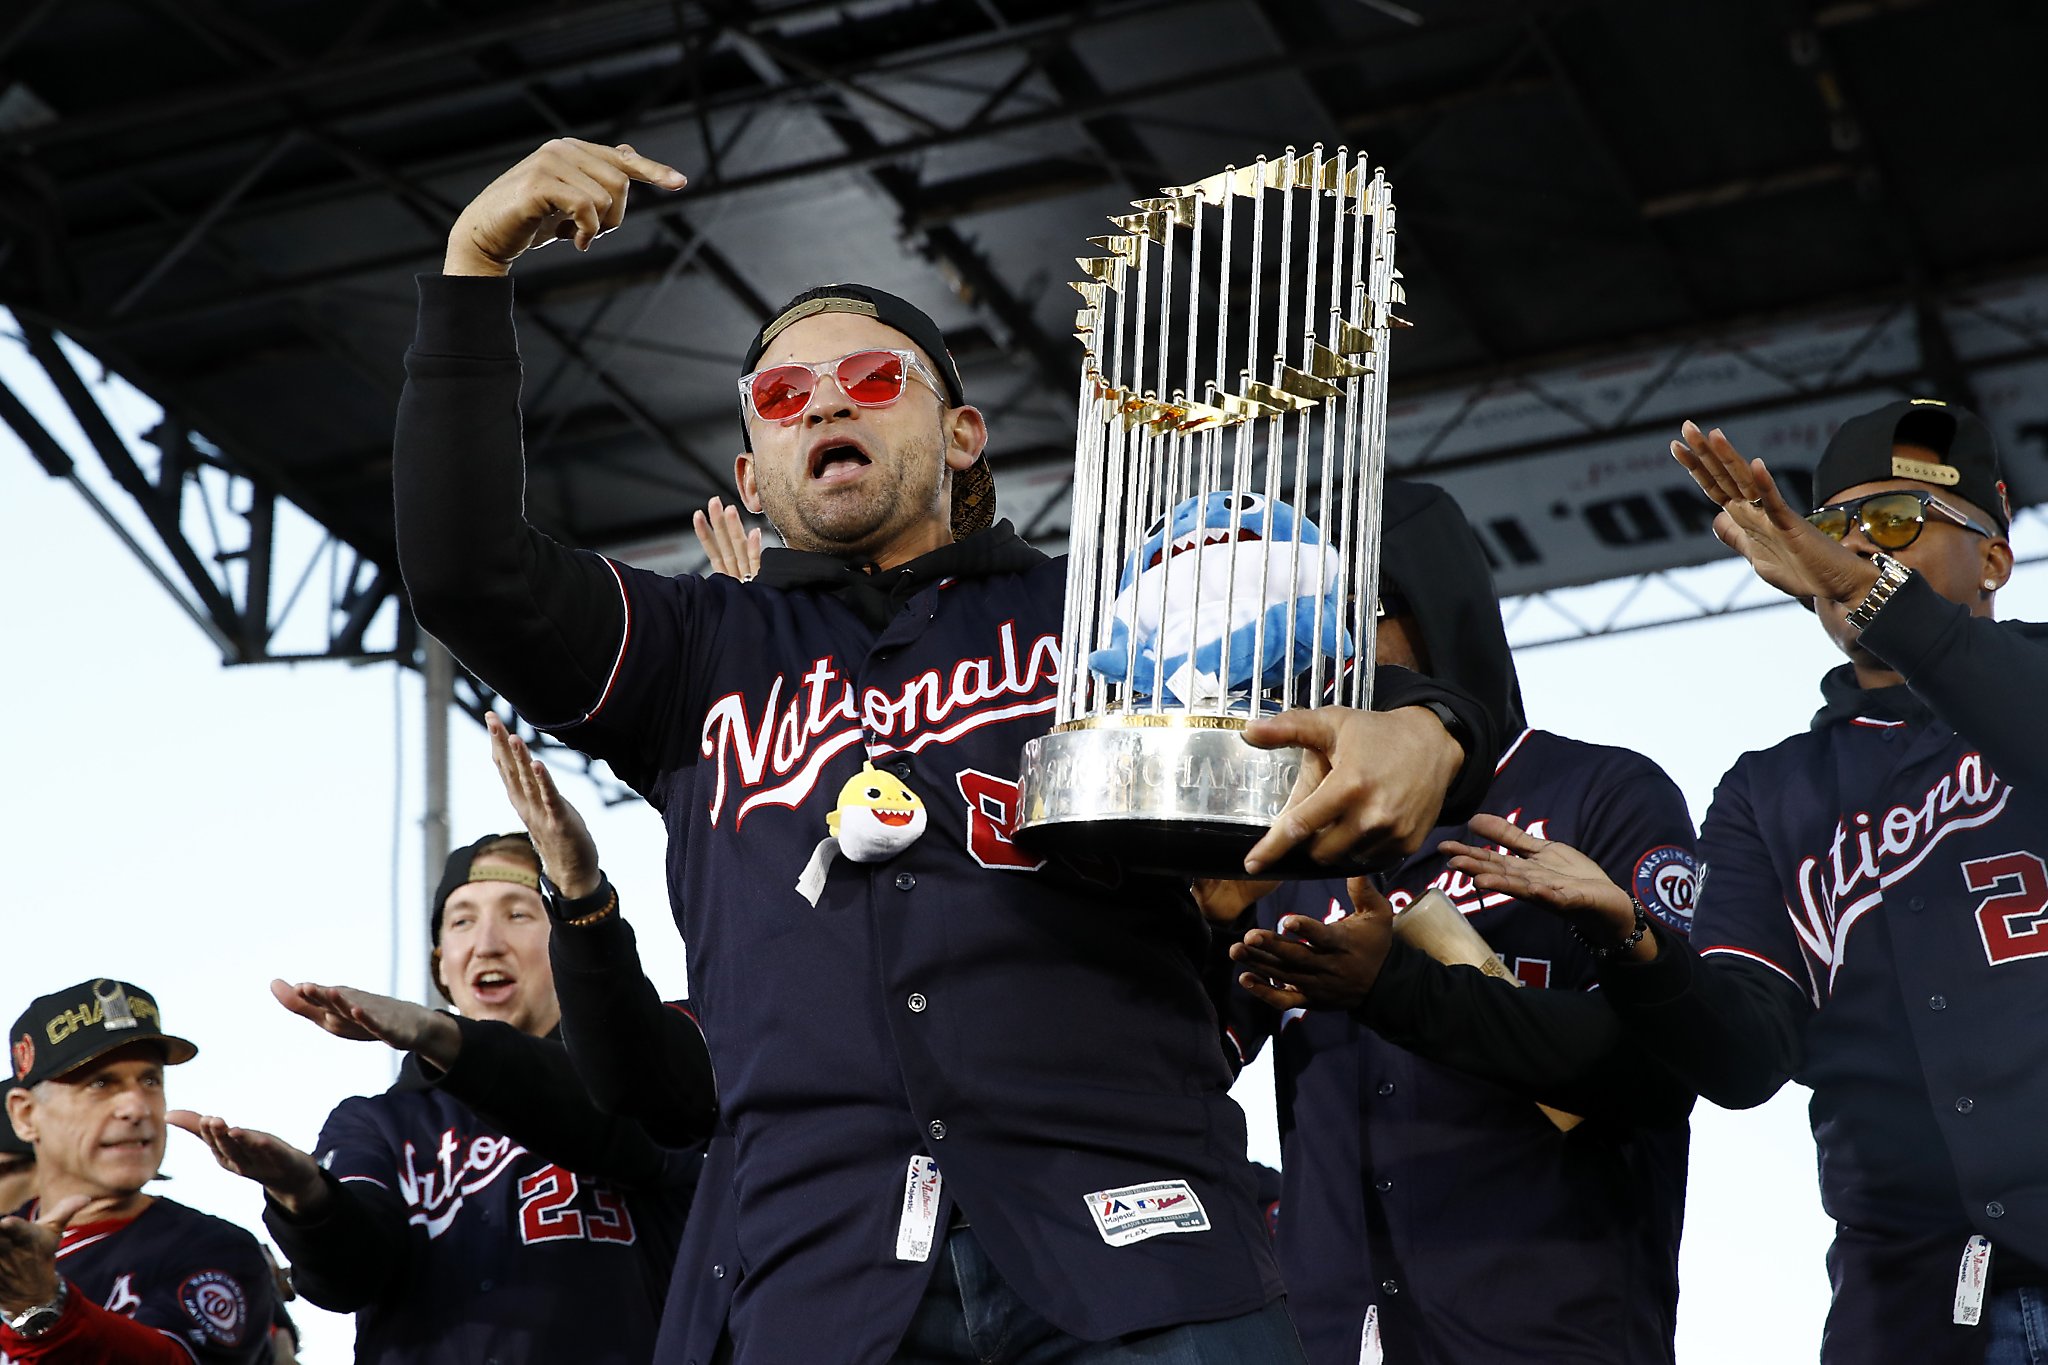 Nationals World Series parade: Will the trophy be broken